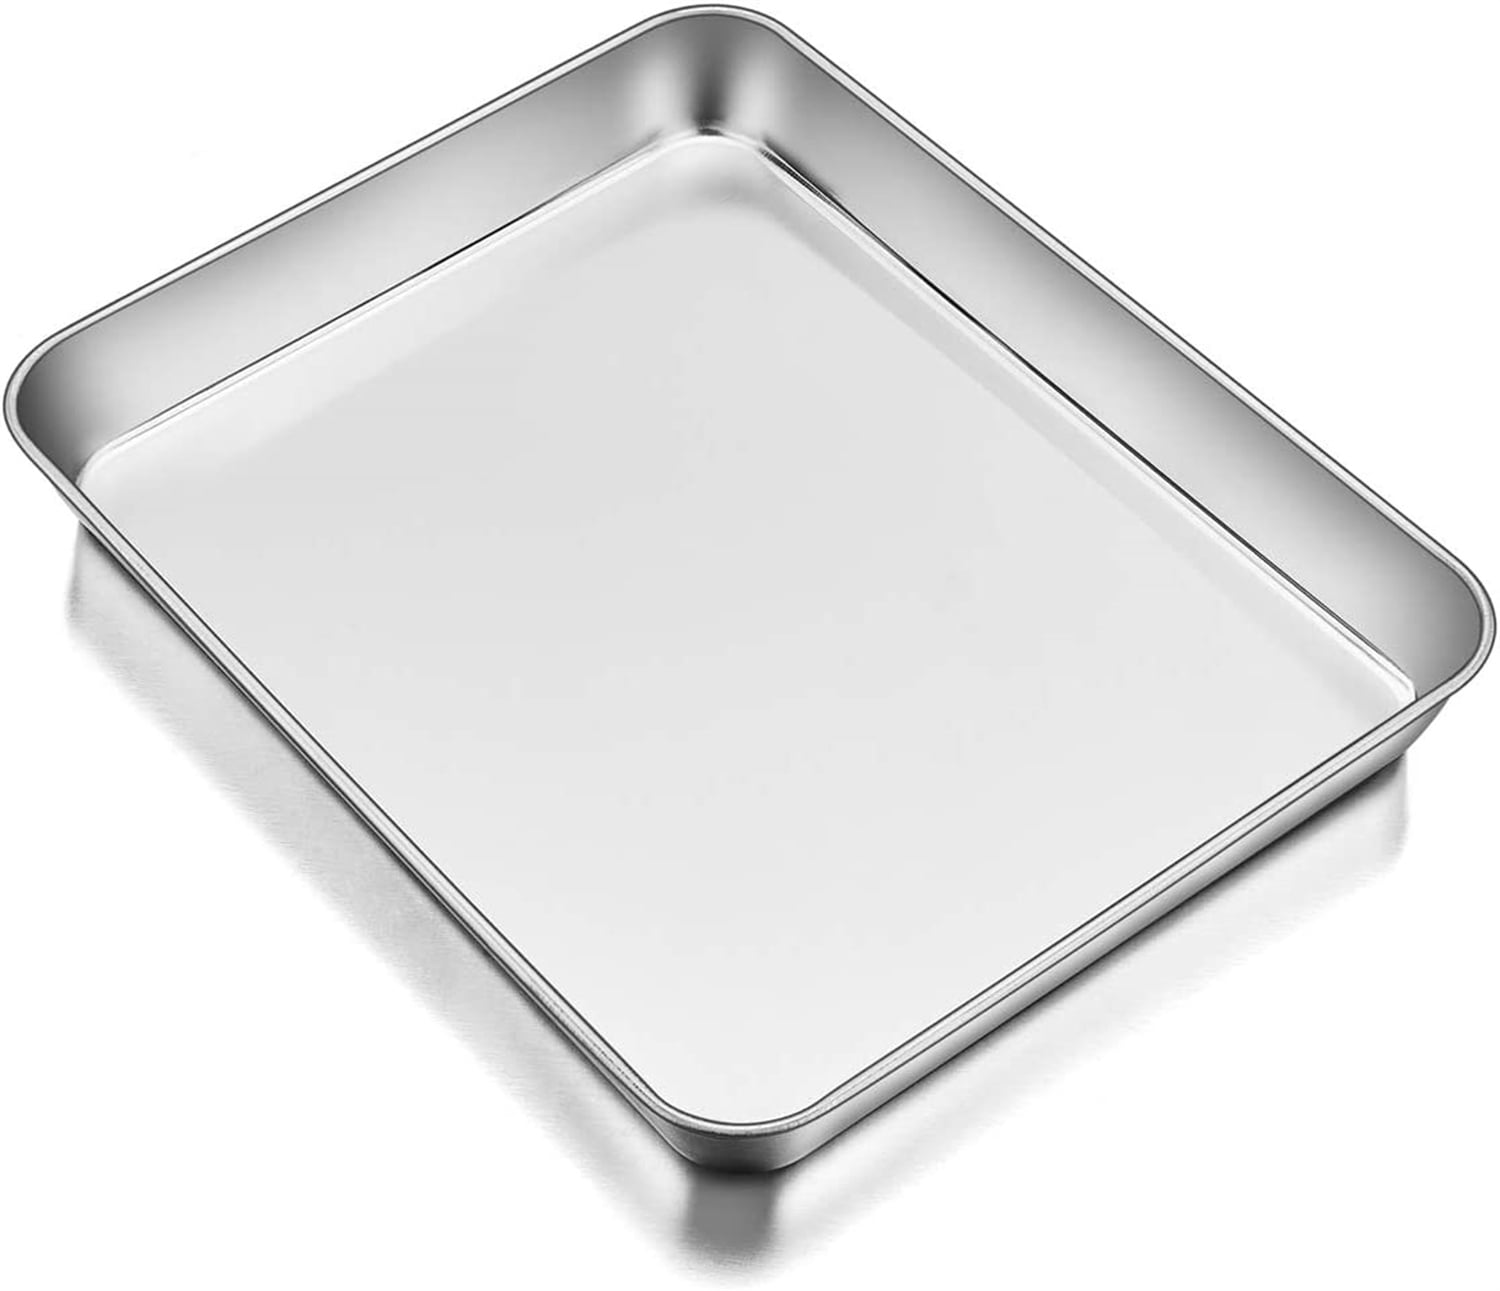 P&P CHEF Mini Toaster Oven Pan, 9 x 7 x 1 Inch Stainless Steel Small Baking  Pan Oven Tray for Cooking & Roasting, Corrugated Bottom Rectangular Cookie